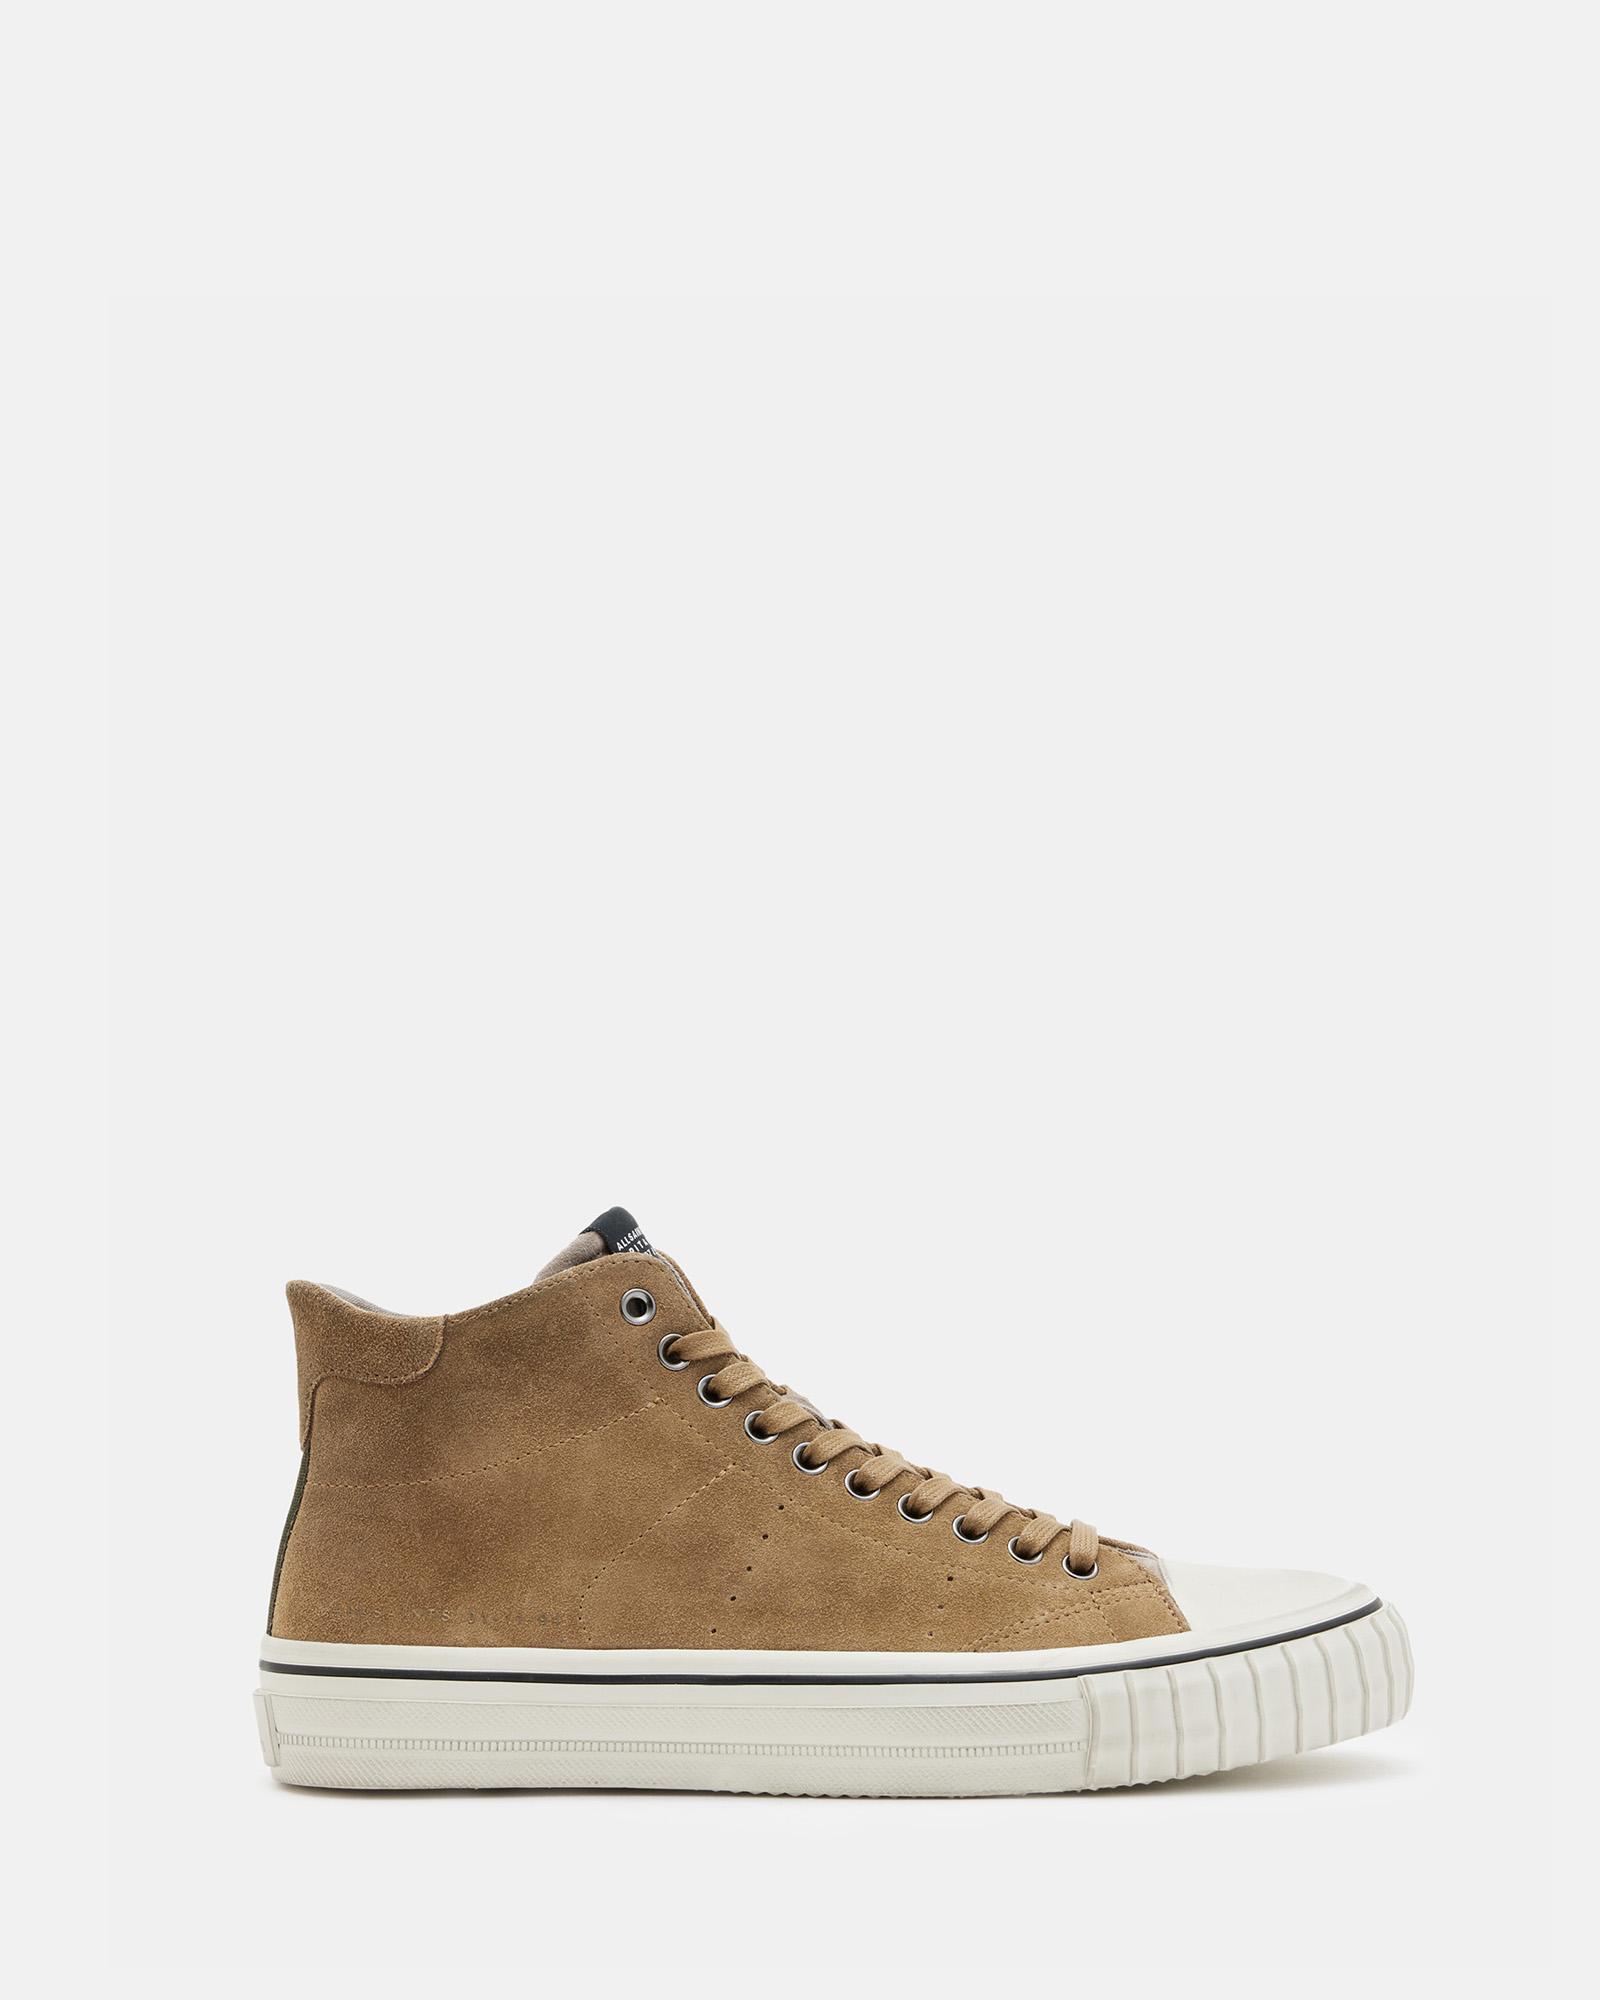 Shop Allsaints Lewis Lace Up Leather High Top Trainers, In Tan